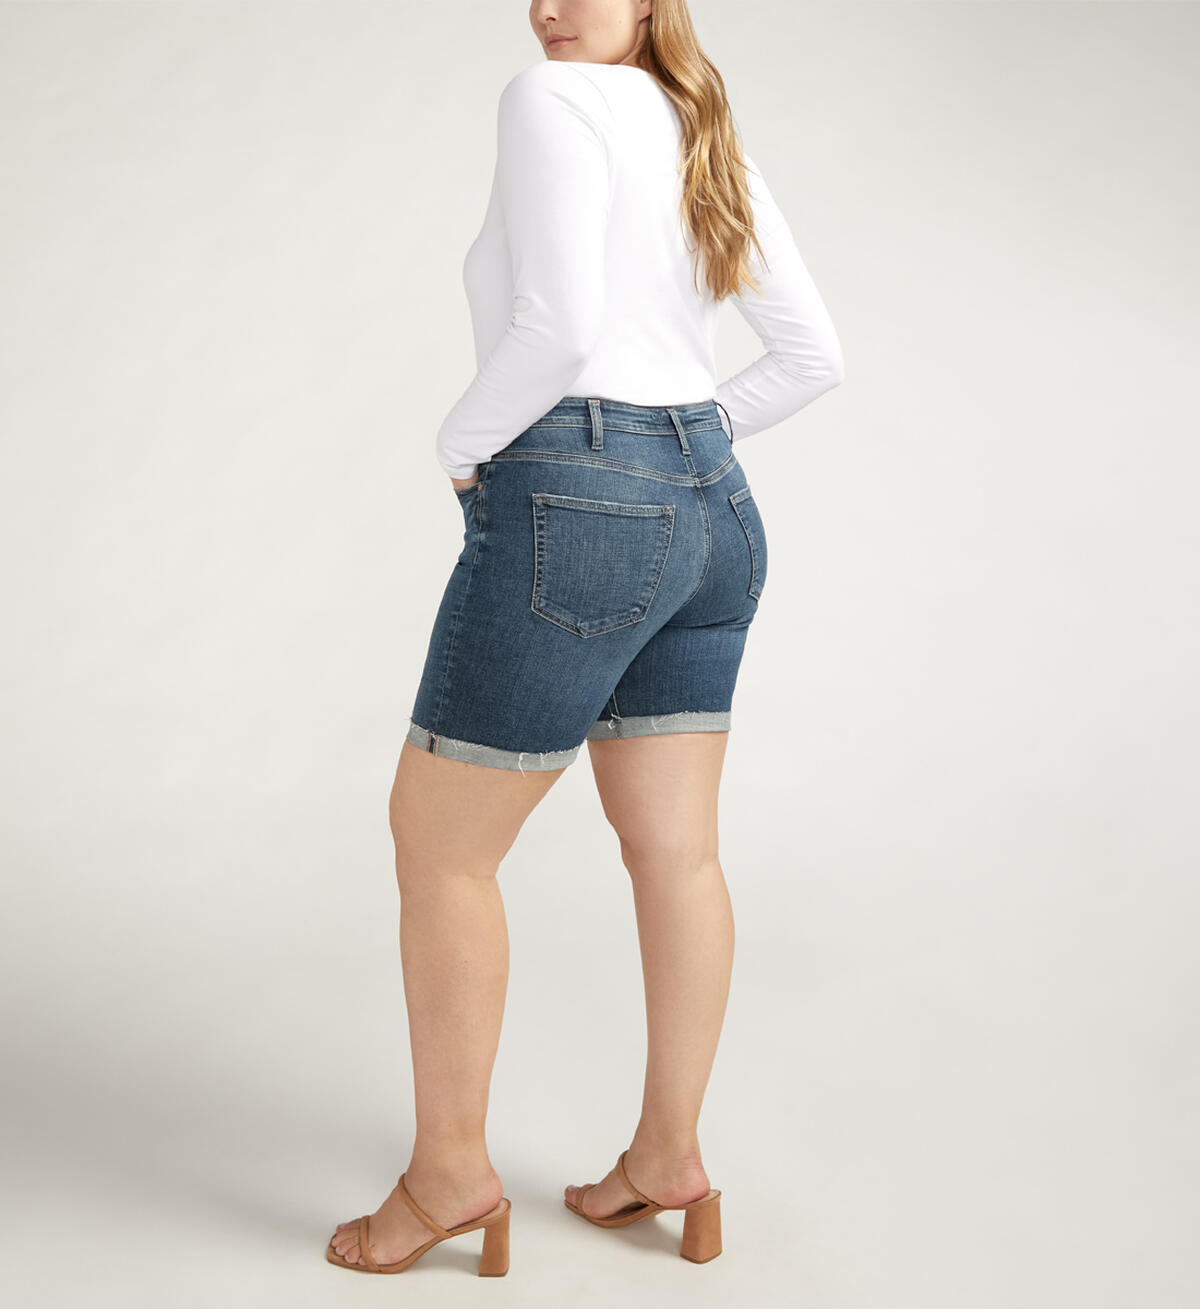 Sure Thing Long Shorts Plus Size, , hi-res image number 1